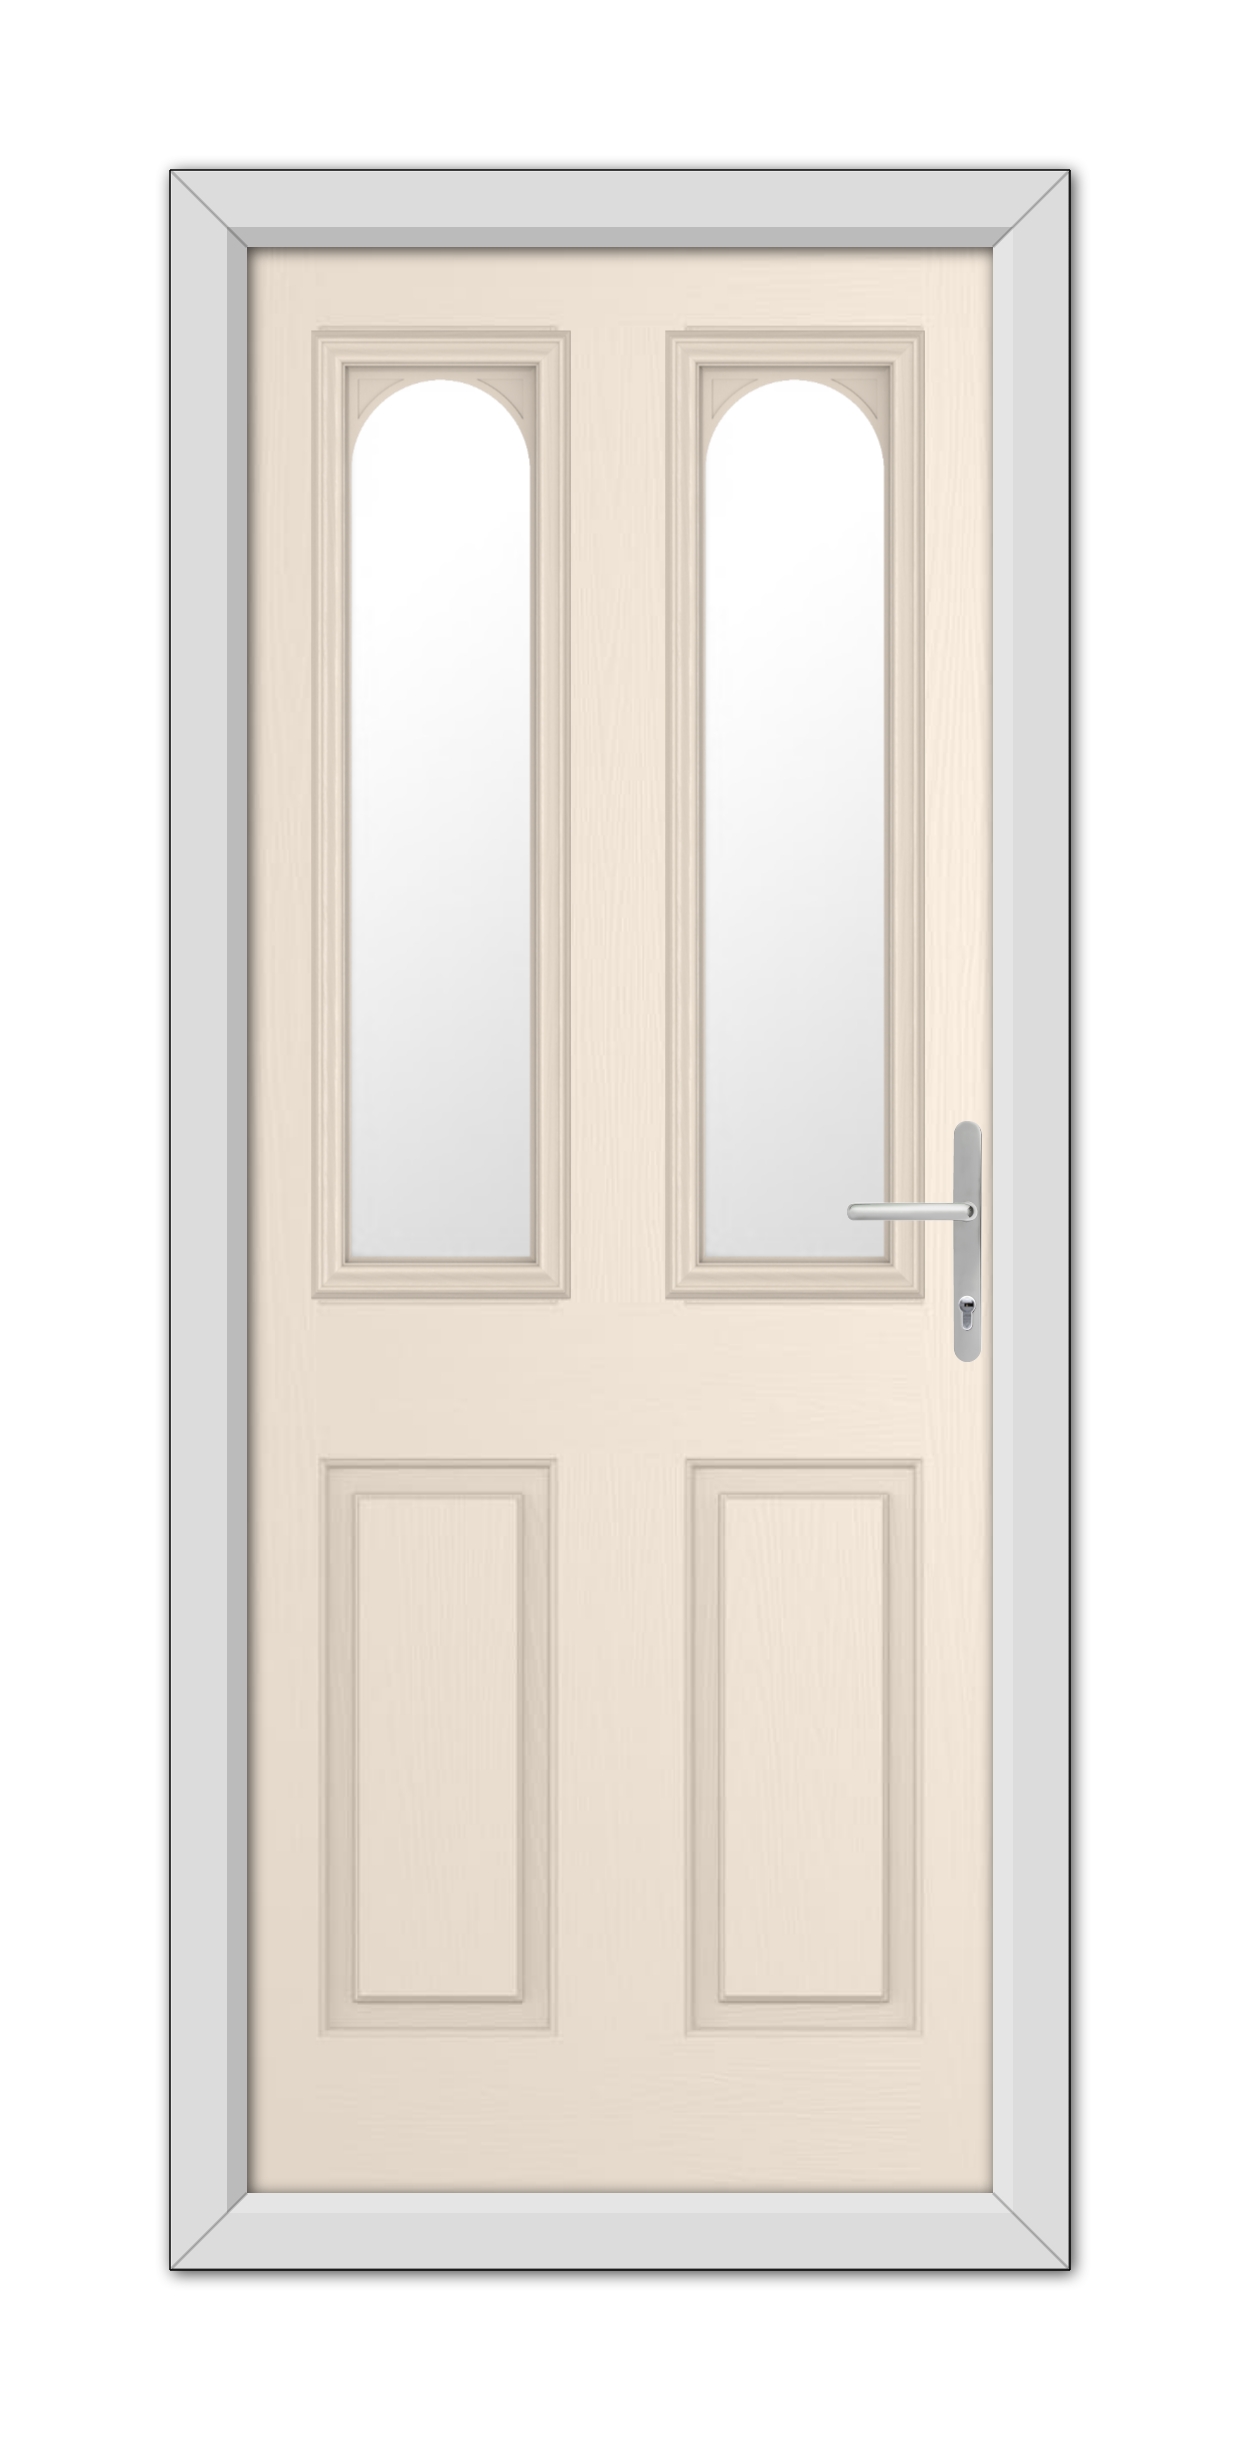 A modern Cream Elmhurst Composite Door 48mm Timber Core with glass panels on the upper half and silver handles, set in a simple gray frame.